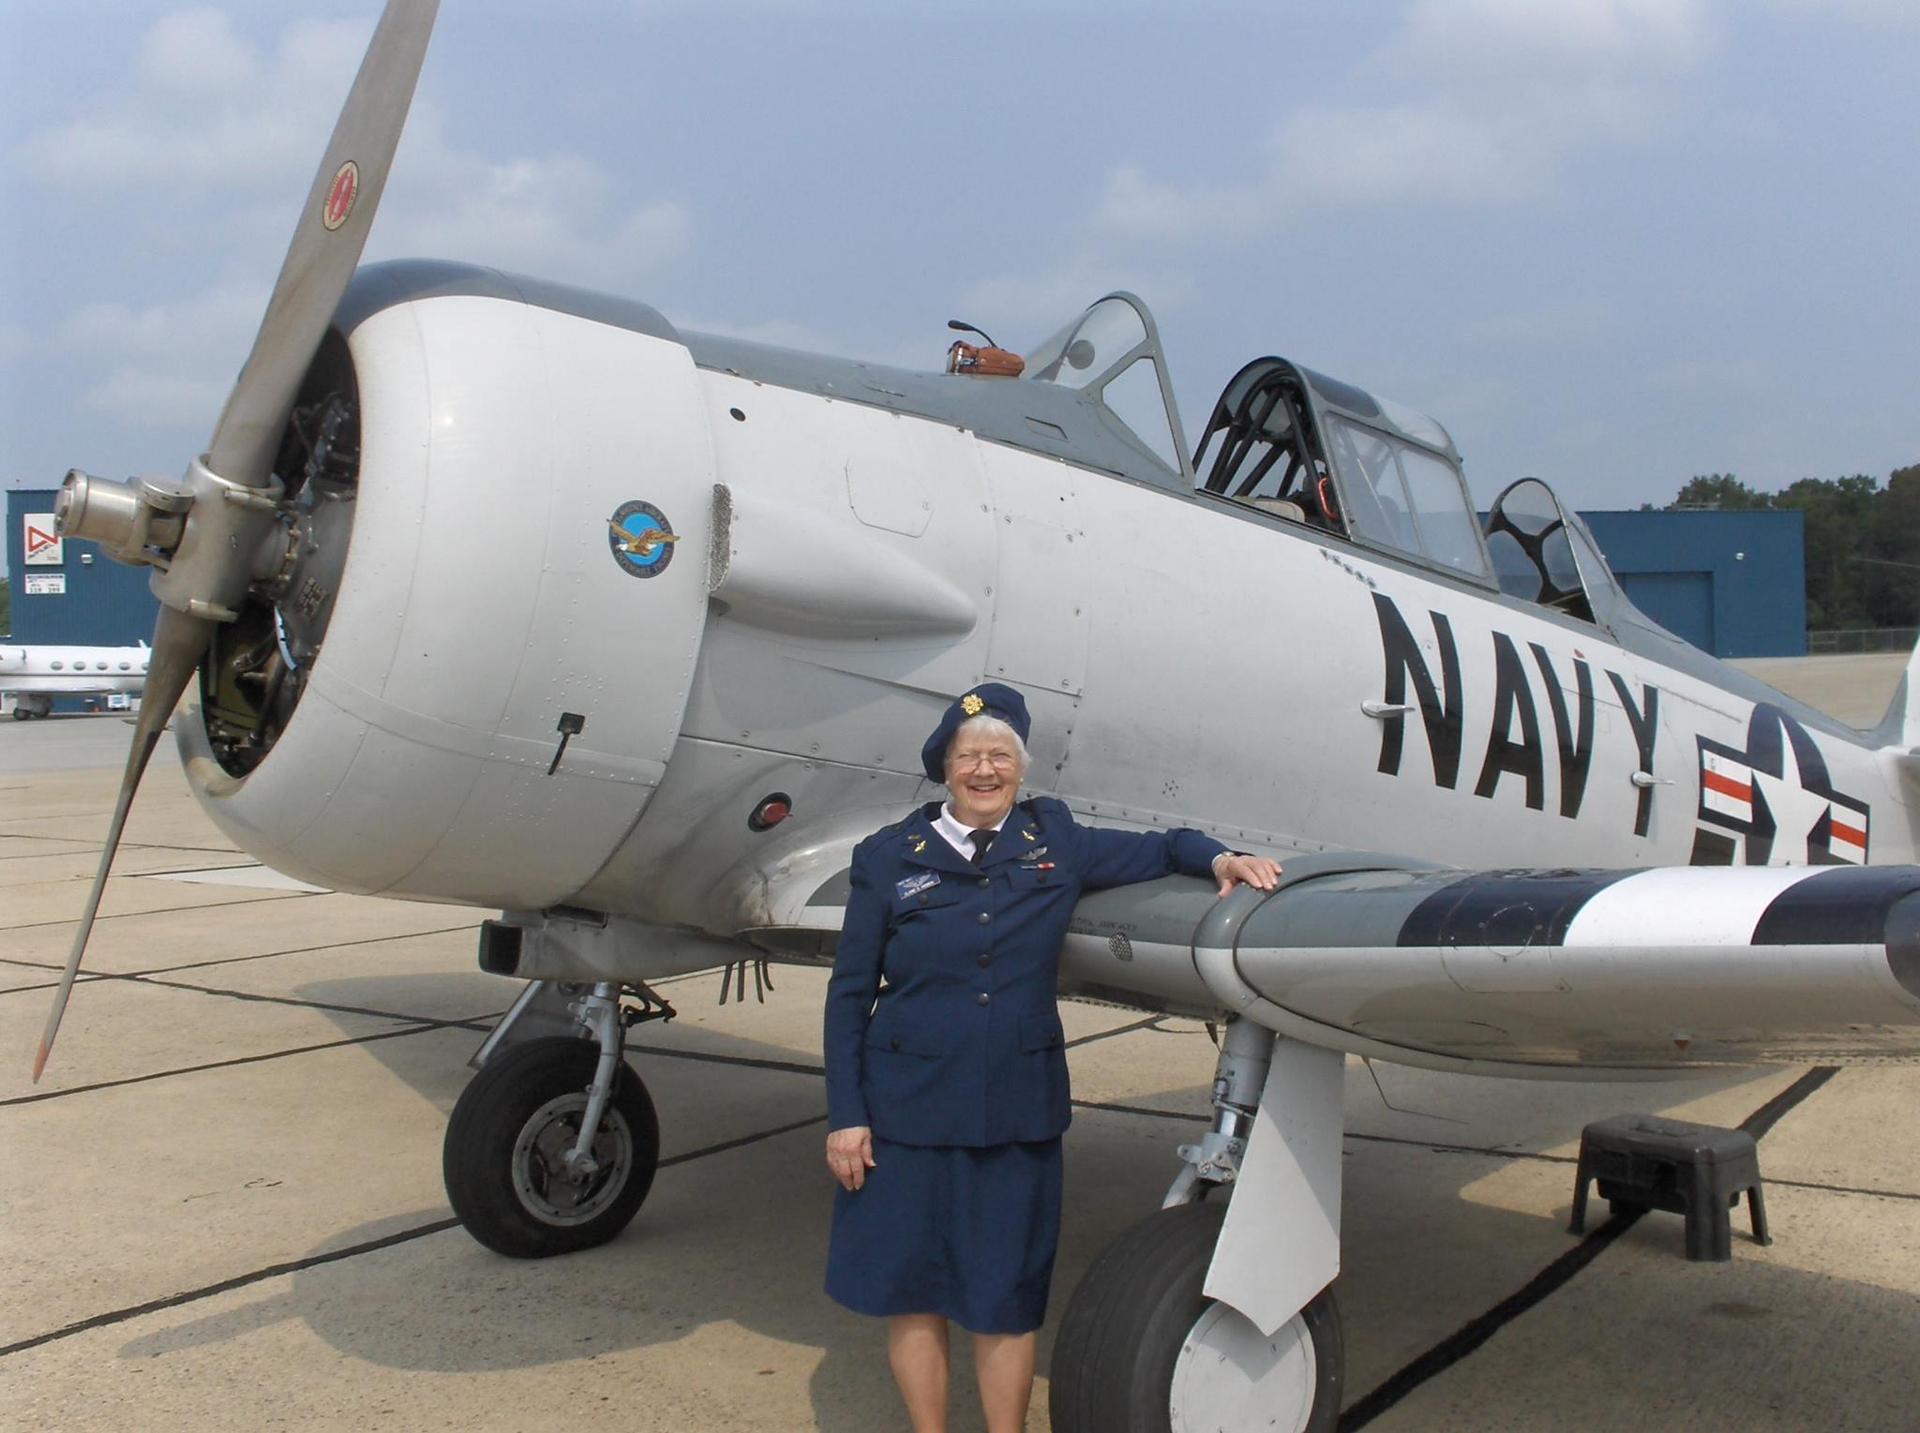 Elaine Harmon, one of just over 1000 women who served as WASPs, or Women Airforce Service Pilots